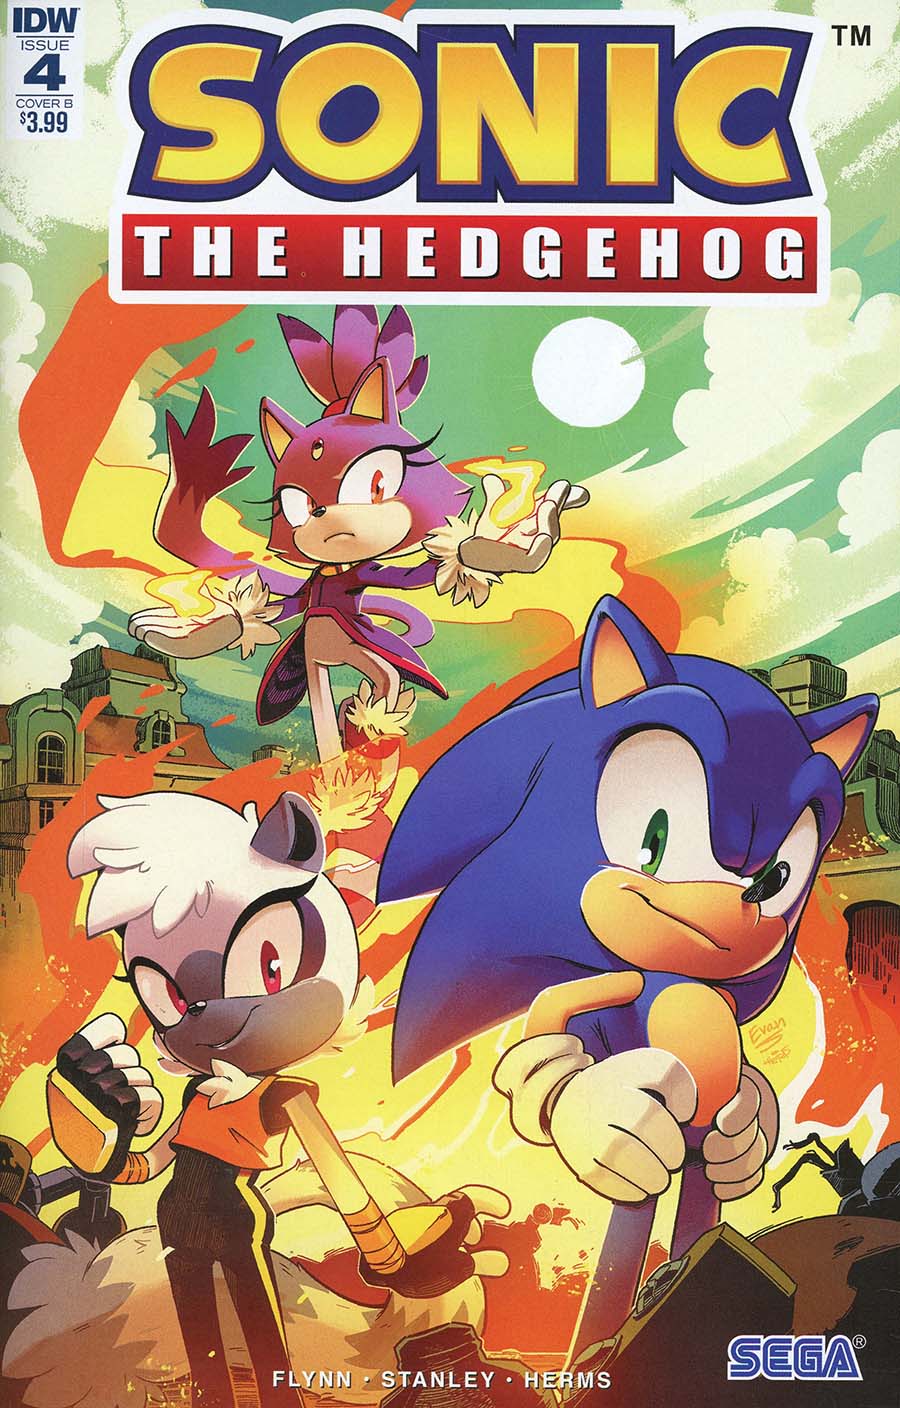 Sonic The Hedgehog Vol 3 #4 Cover B Variant Evan Stanley Cover